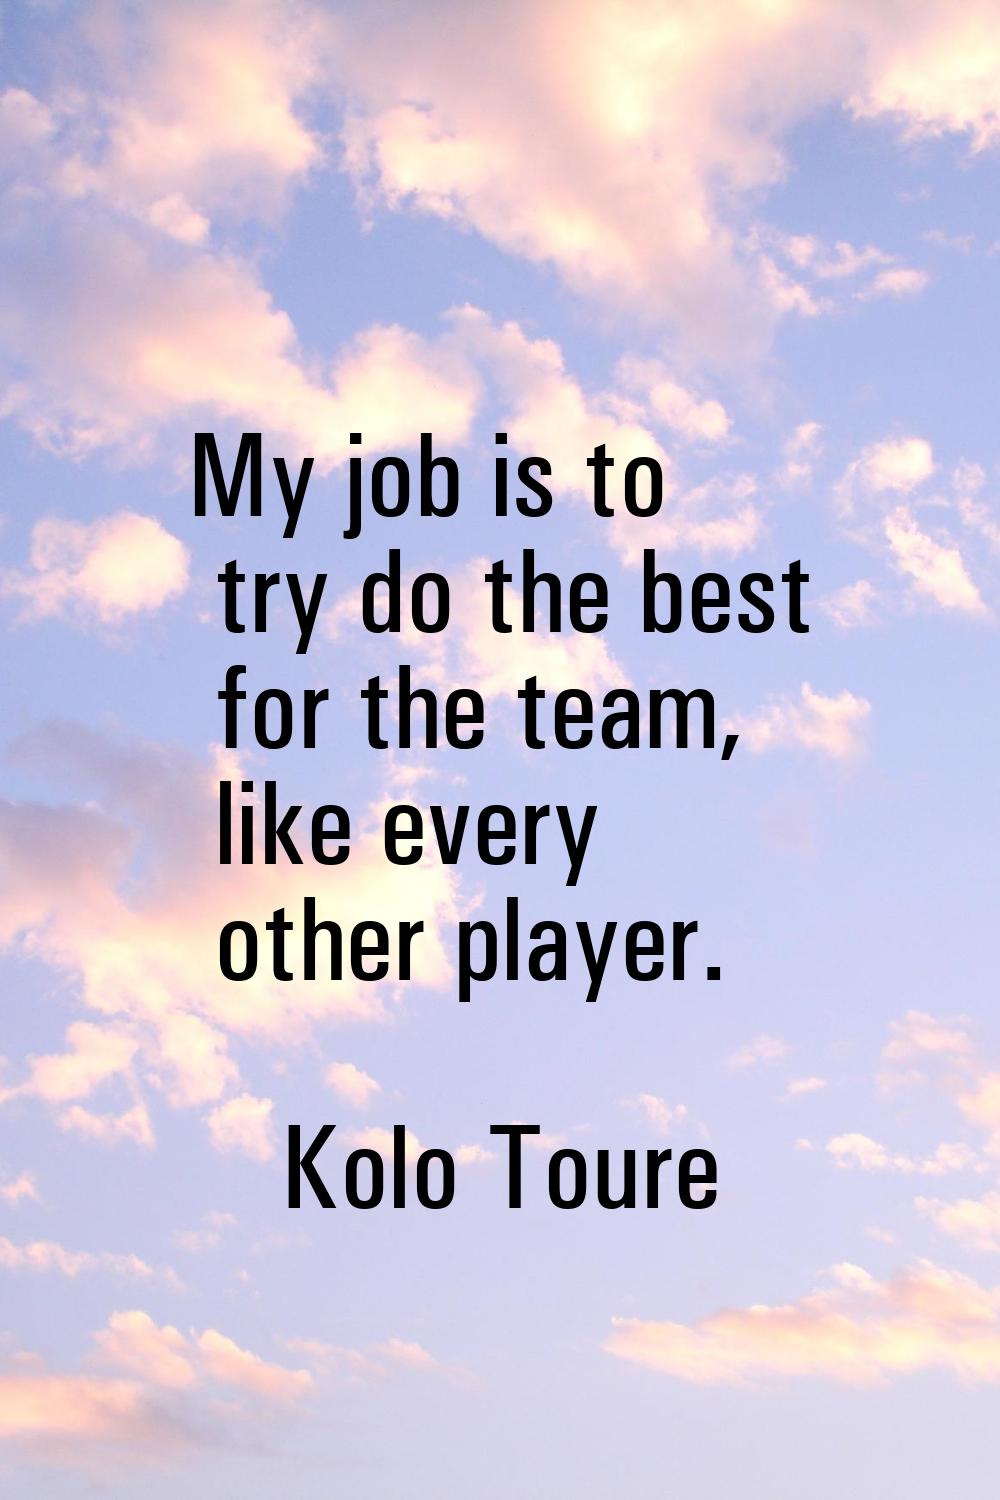 My job is to try do the best for the team, like every other player.